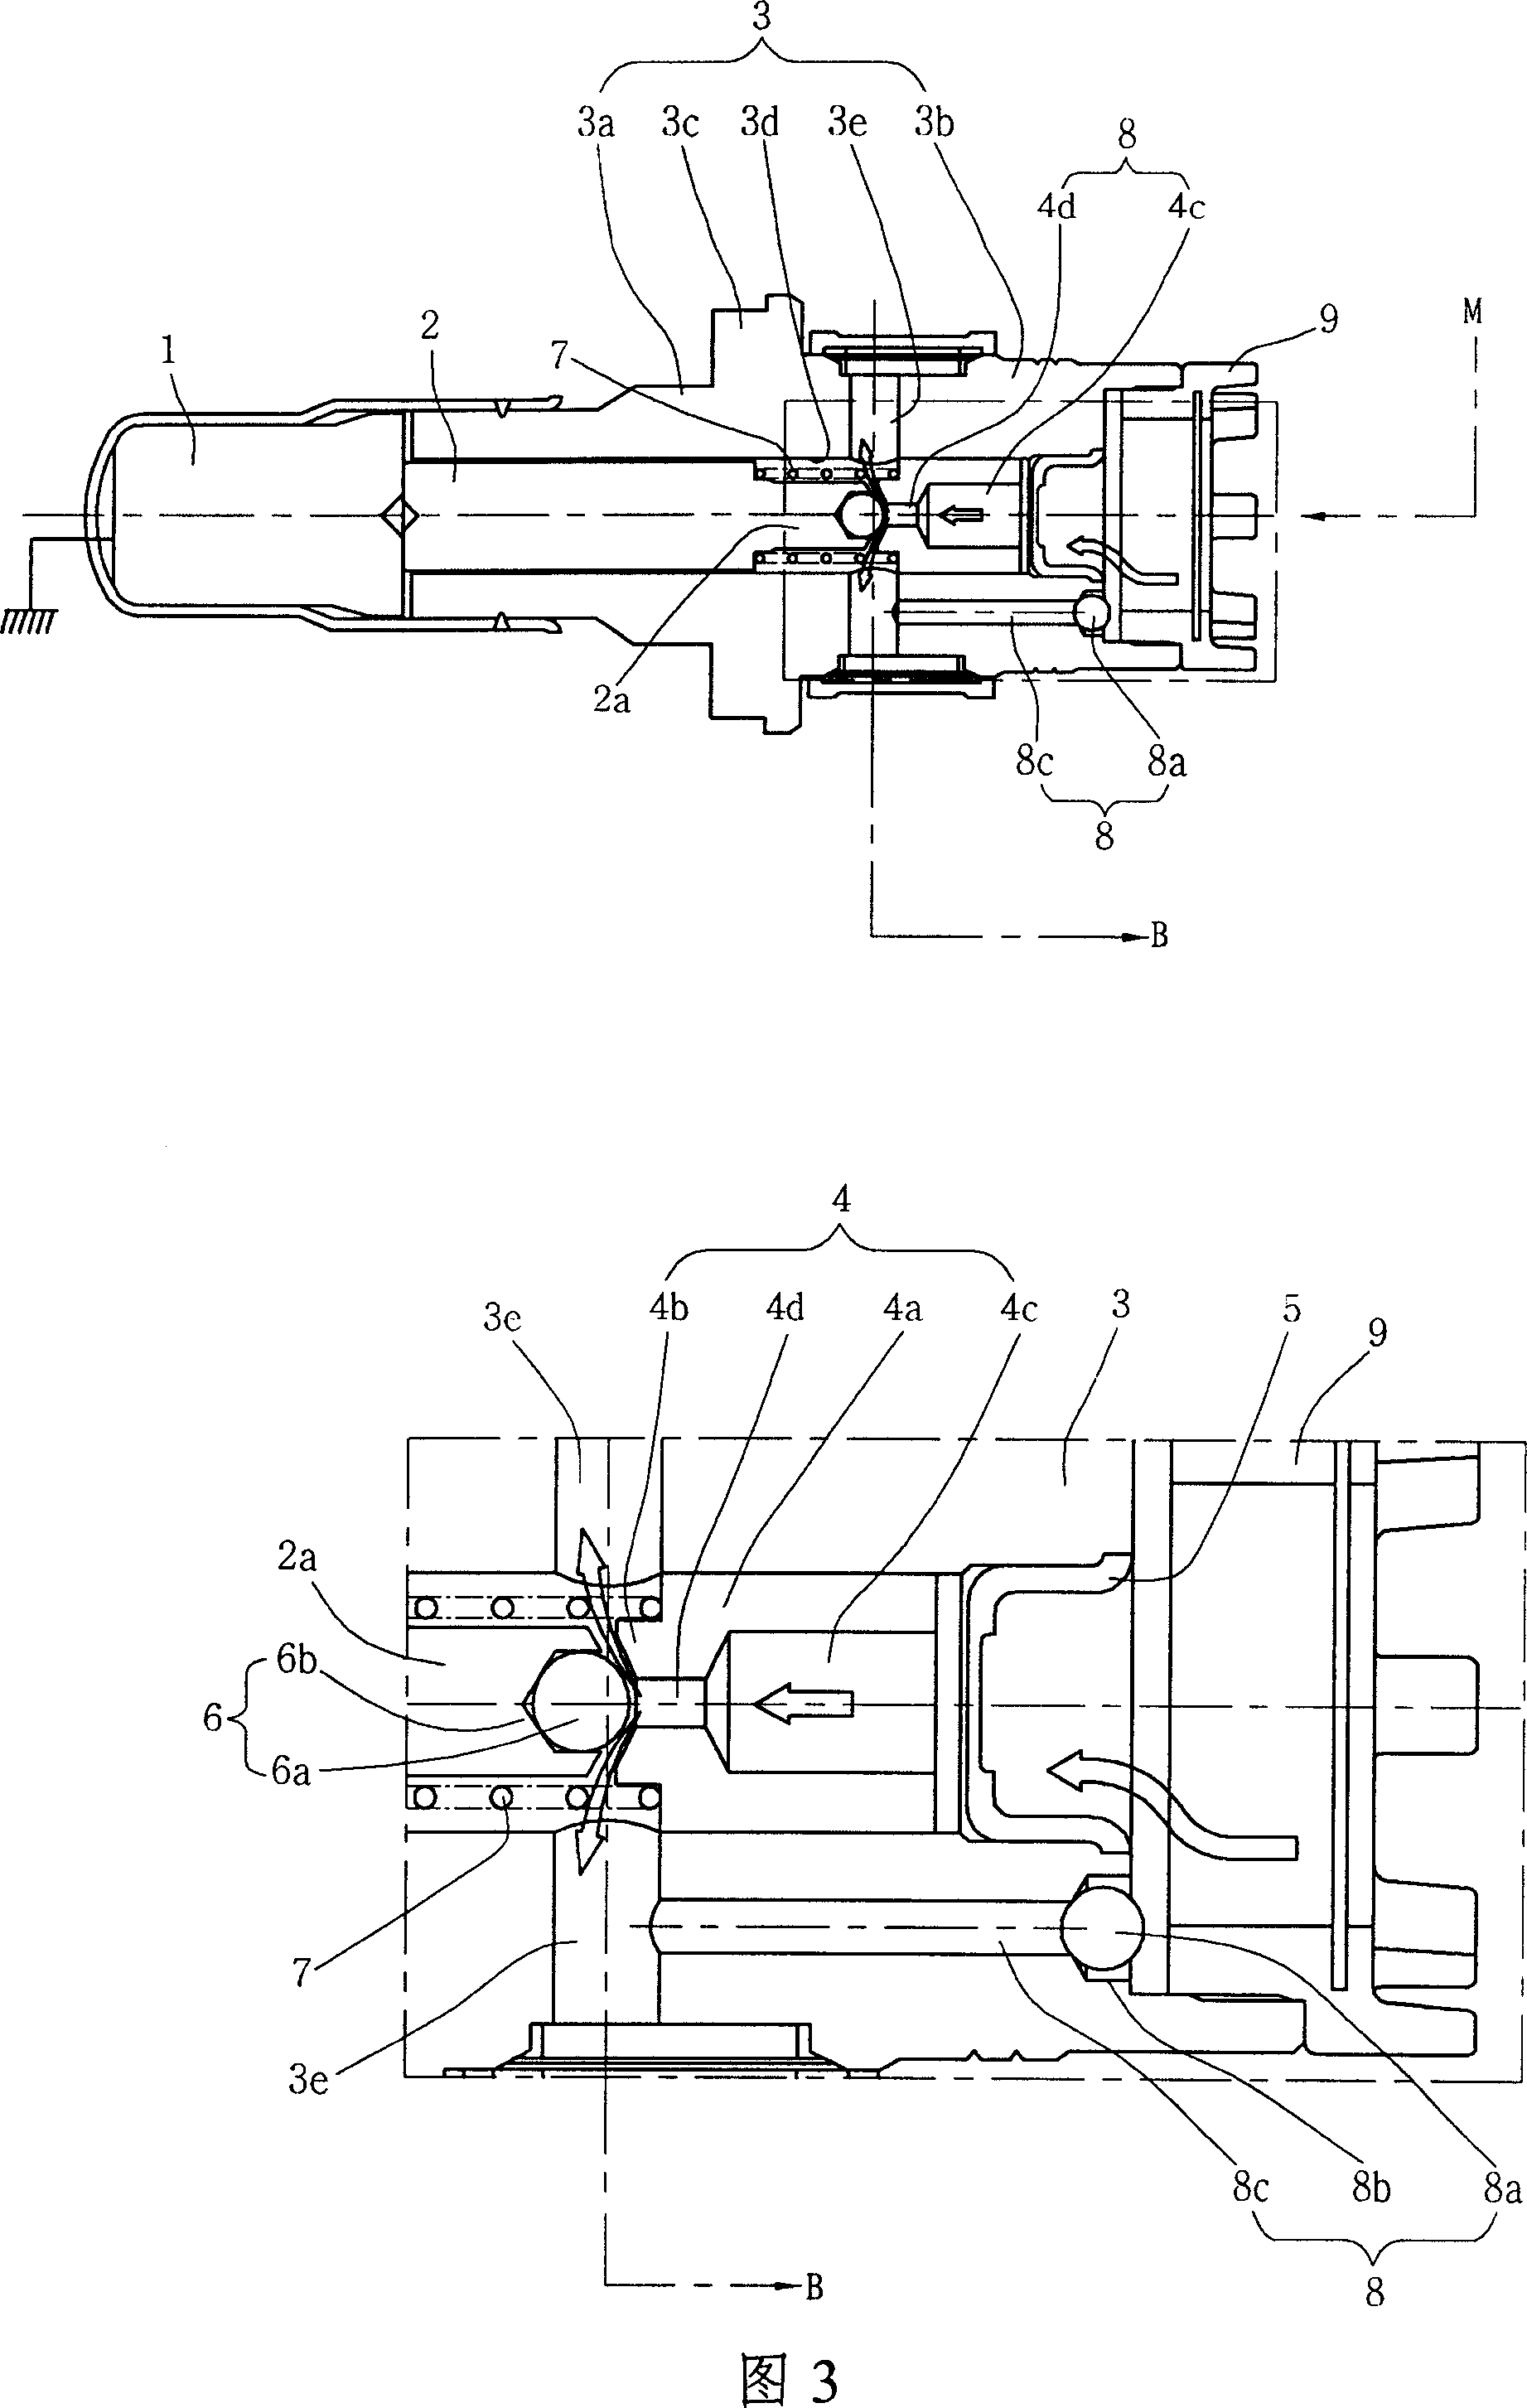 Solenoid valve for controlling the flow of brake oil